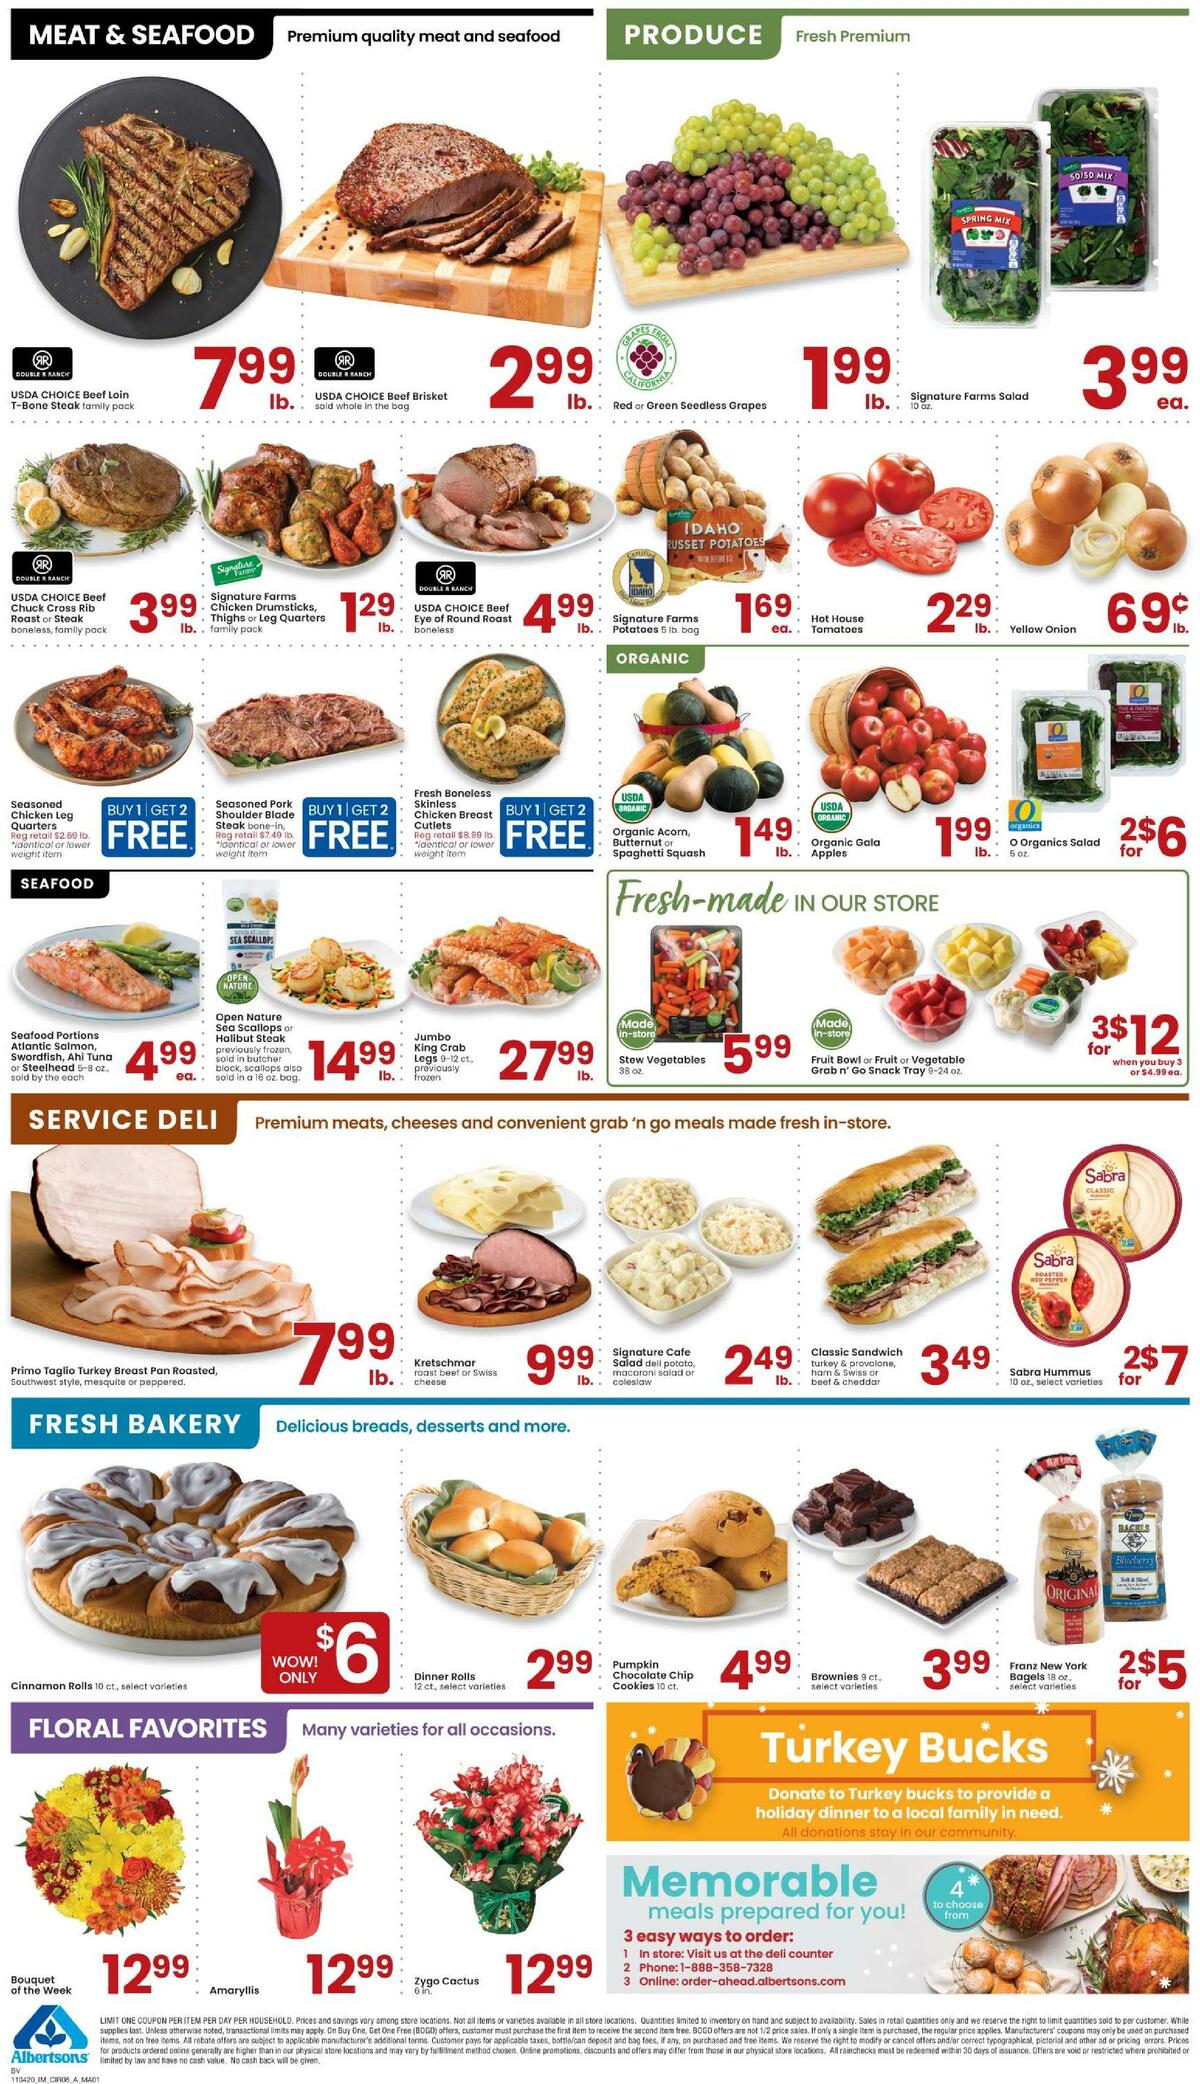 Albertsons Weekly Ad from November 4